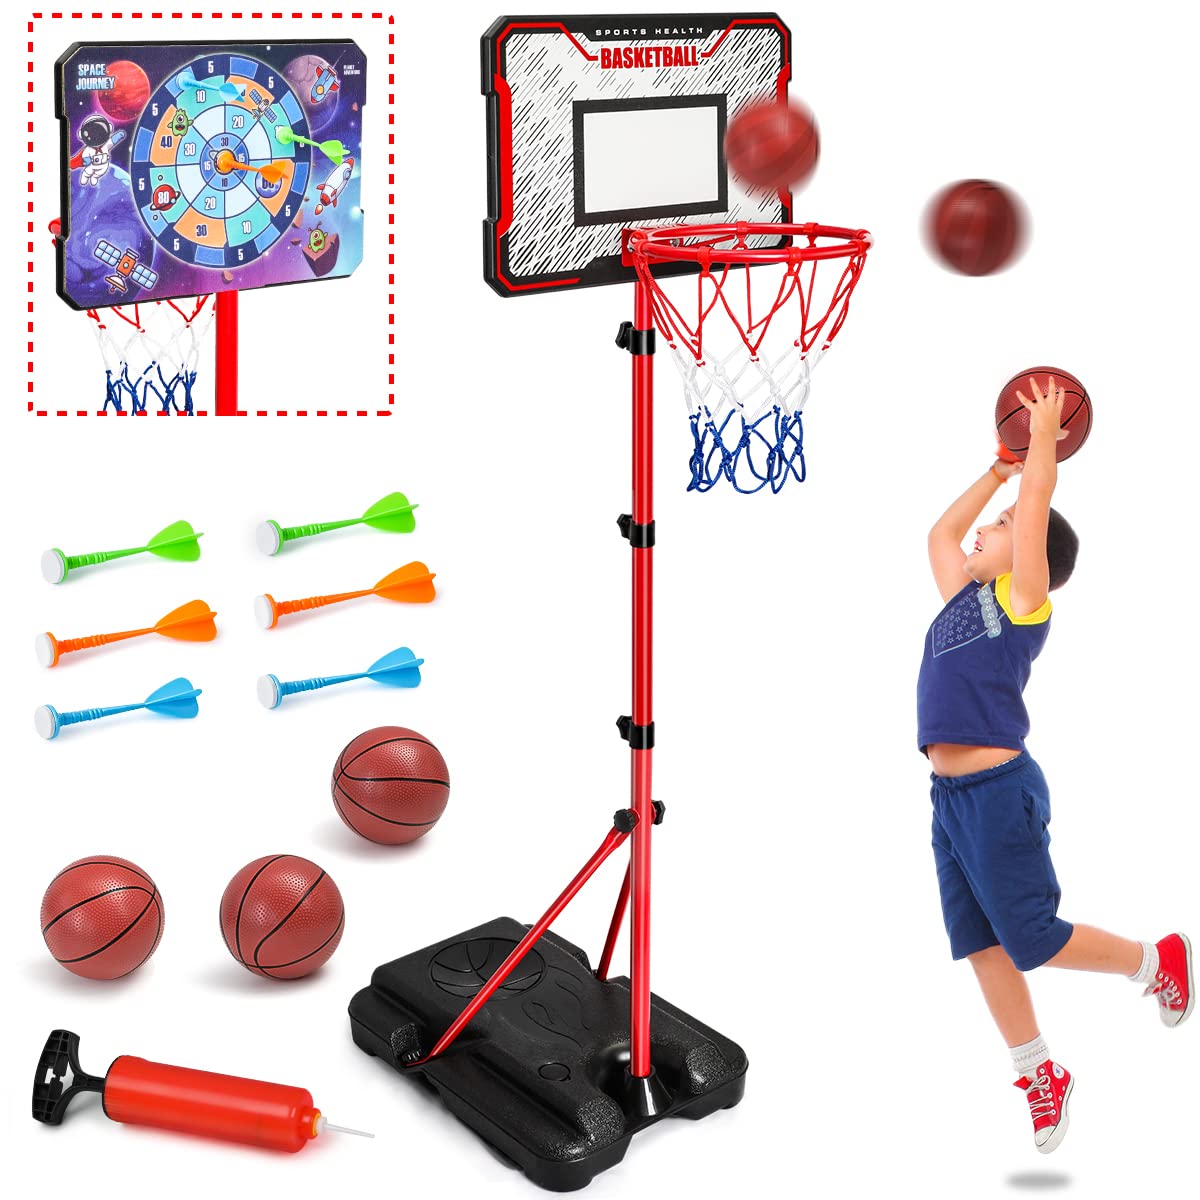 Meland Kids Basketball Hoop - Adjustable Height 2.9ft-6.2ft Toddler Basketball Hoop for Kids, Kids Basketball Goal Indoor & Outdoor Toys Backyard Outside Toys for Boys Age 3 4 5 6 7 8 Years Gift